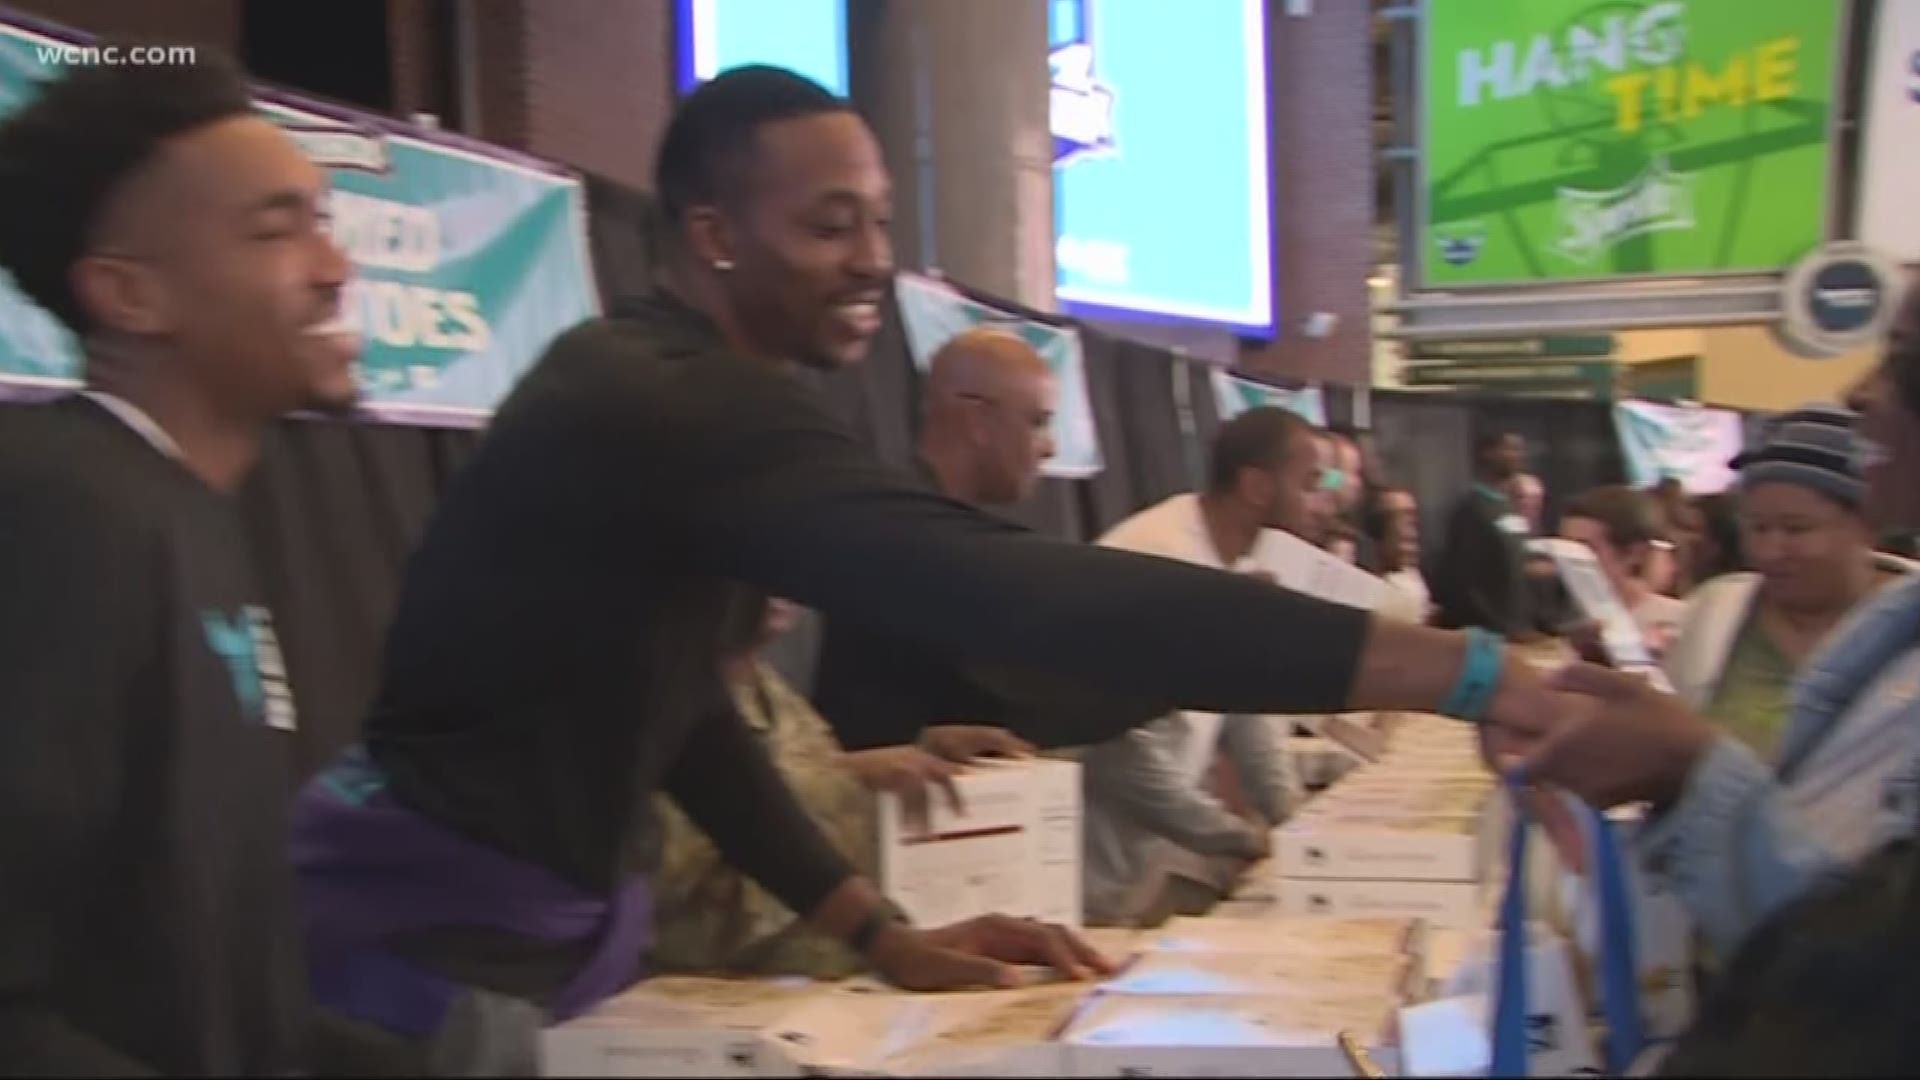 The Charlotte Hornets dished out assists to the community Tuesday night.